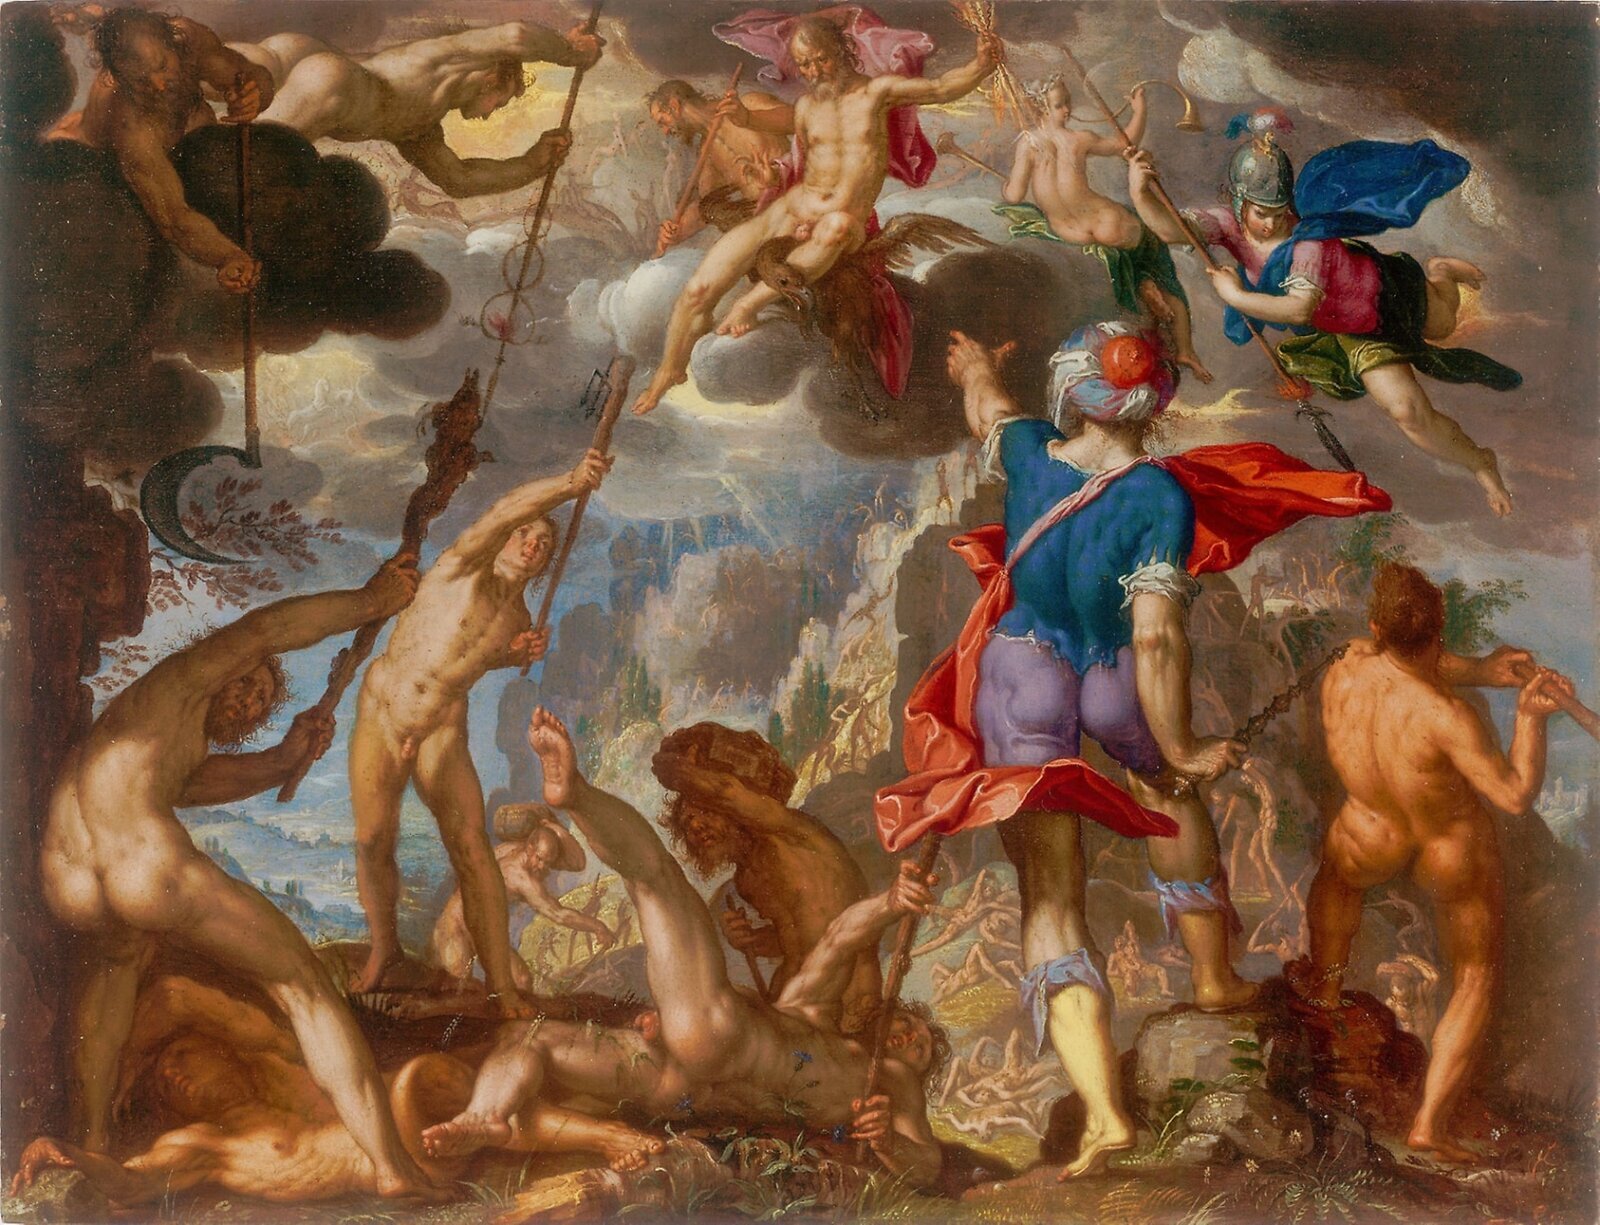 The Battle Between the Gods and the Titans by Joachim Wtewael in the Art Institute of Chicago